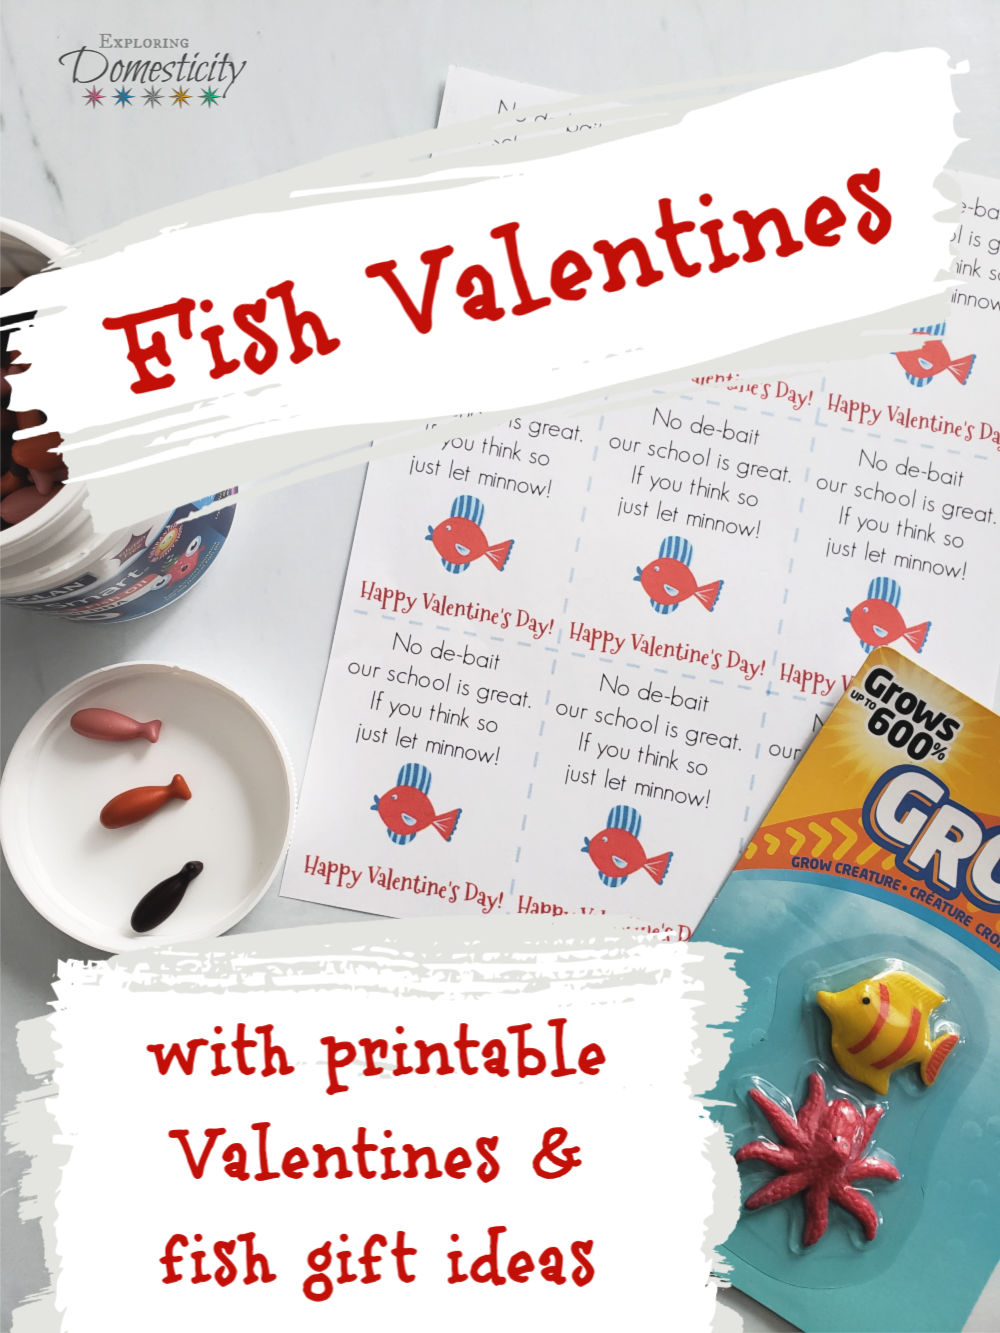 fish-valentine-ideas-and-free-printable-exploring-domesticity